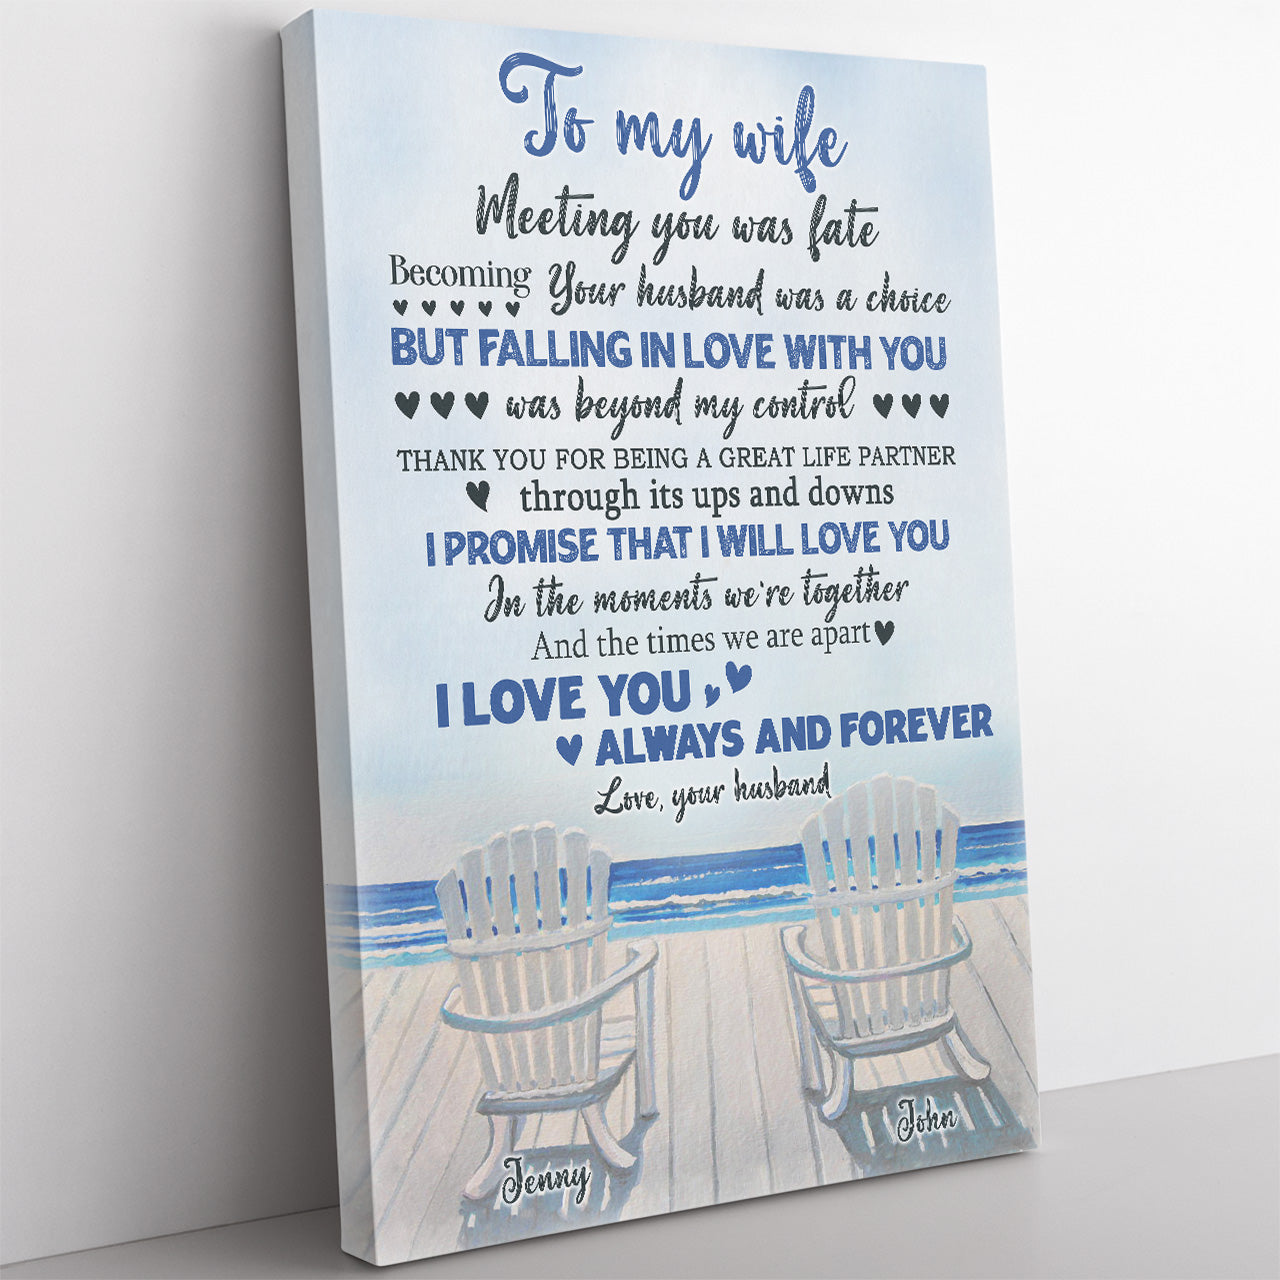 Personalized Canvas Gift For Wife, Falling in Love With You Anniversary Canvas Gift